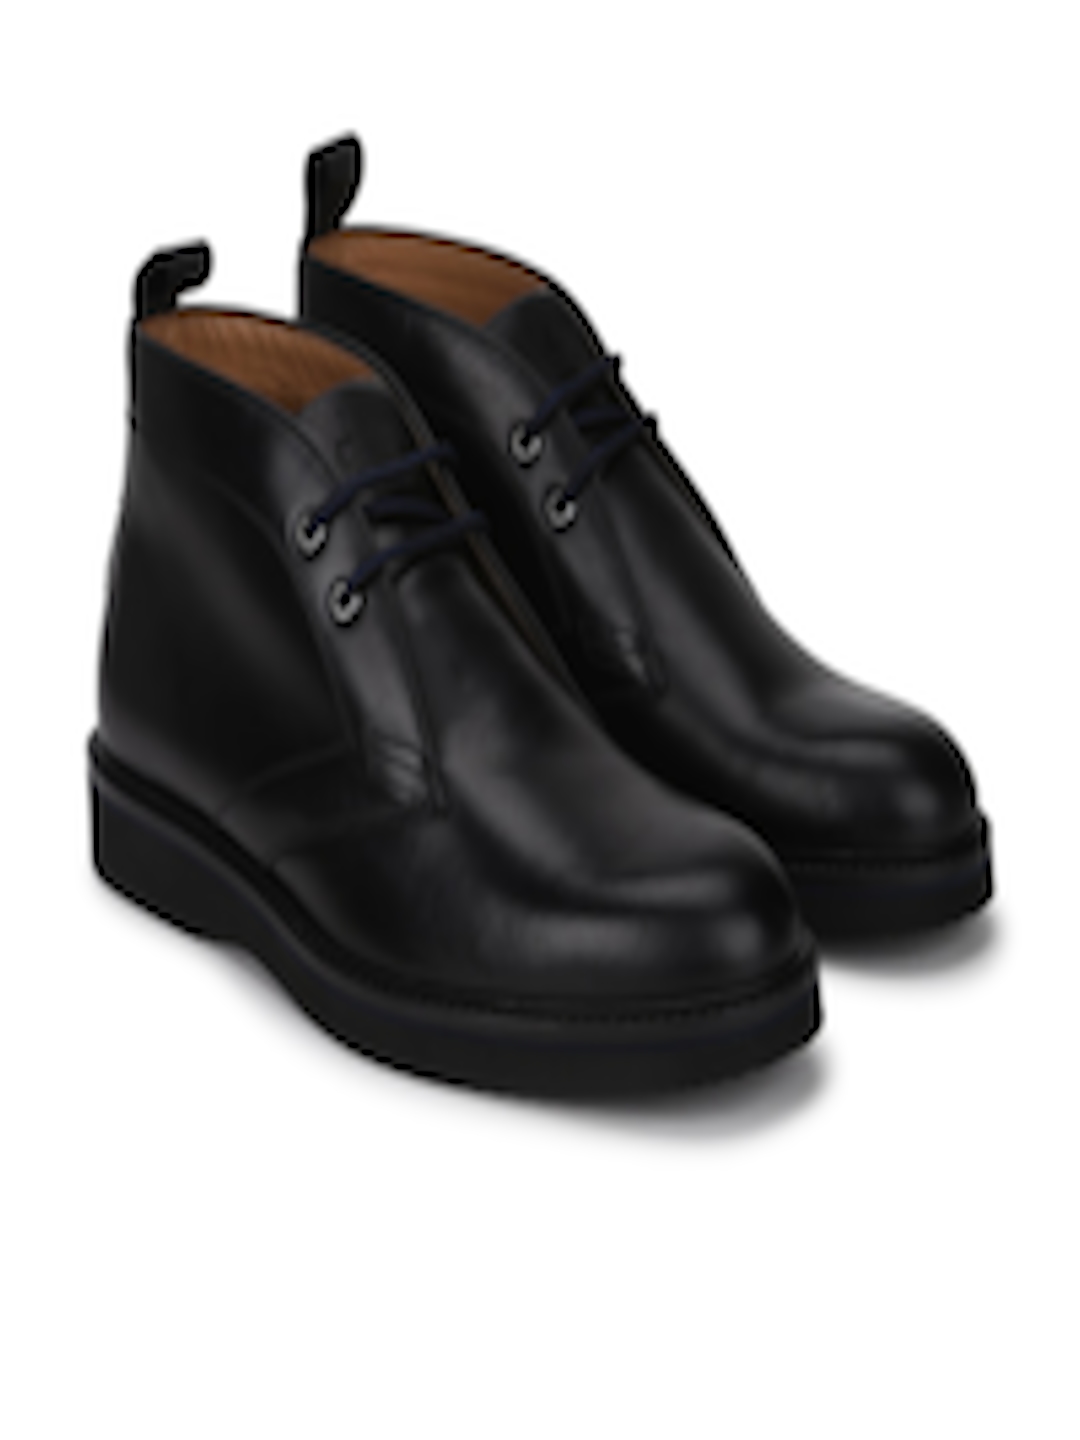 Buy Ted Baker Men Black Leather Flat Boots - Casual Shoes for Men